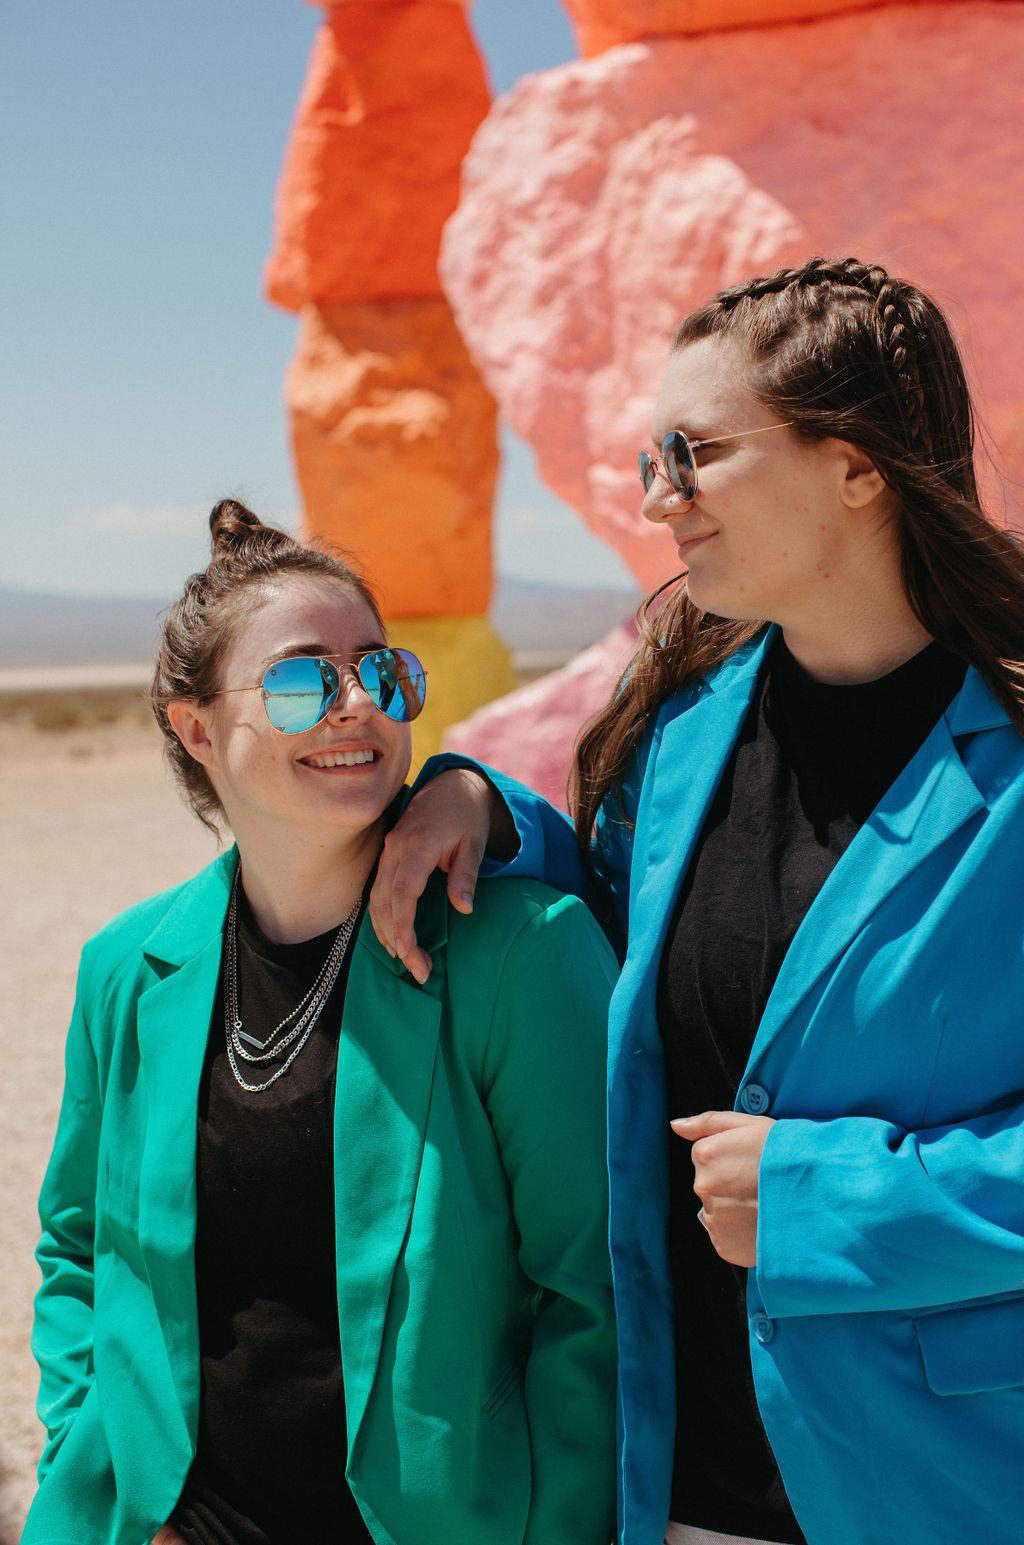 Two individuals in colorful attire with a vibrant, sculptural background, visually representing the dynamic and personalized approach in therapist website design